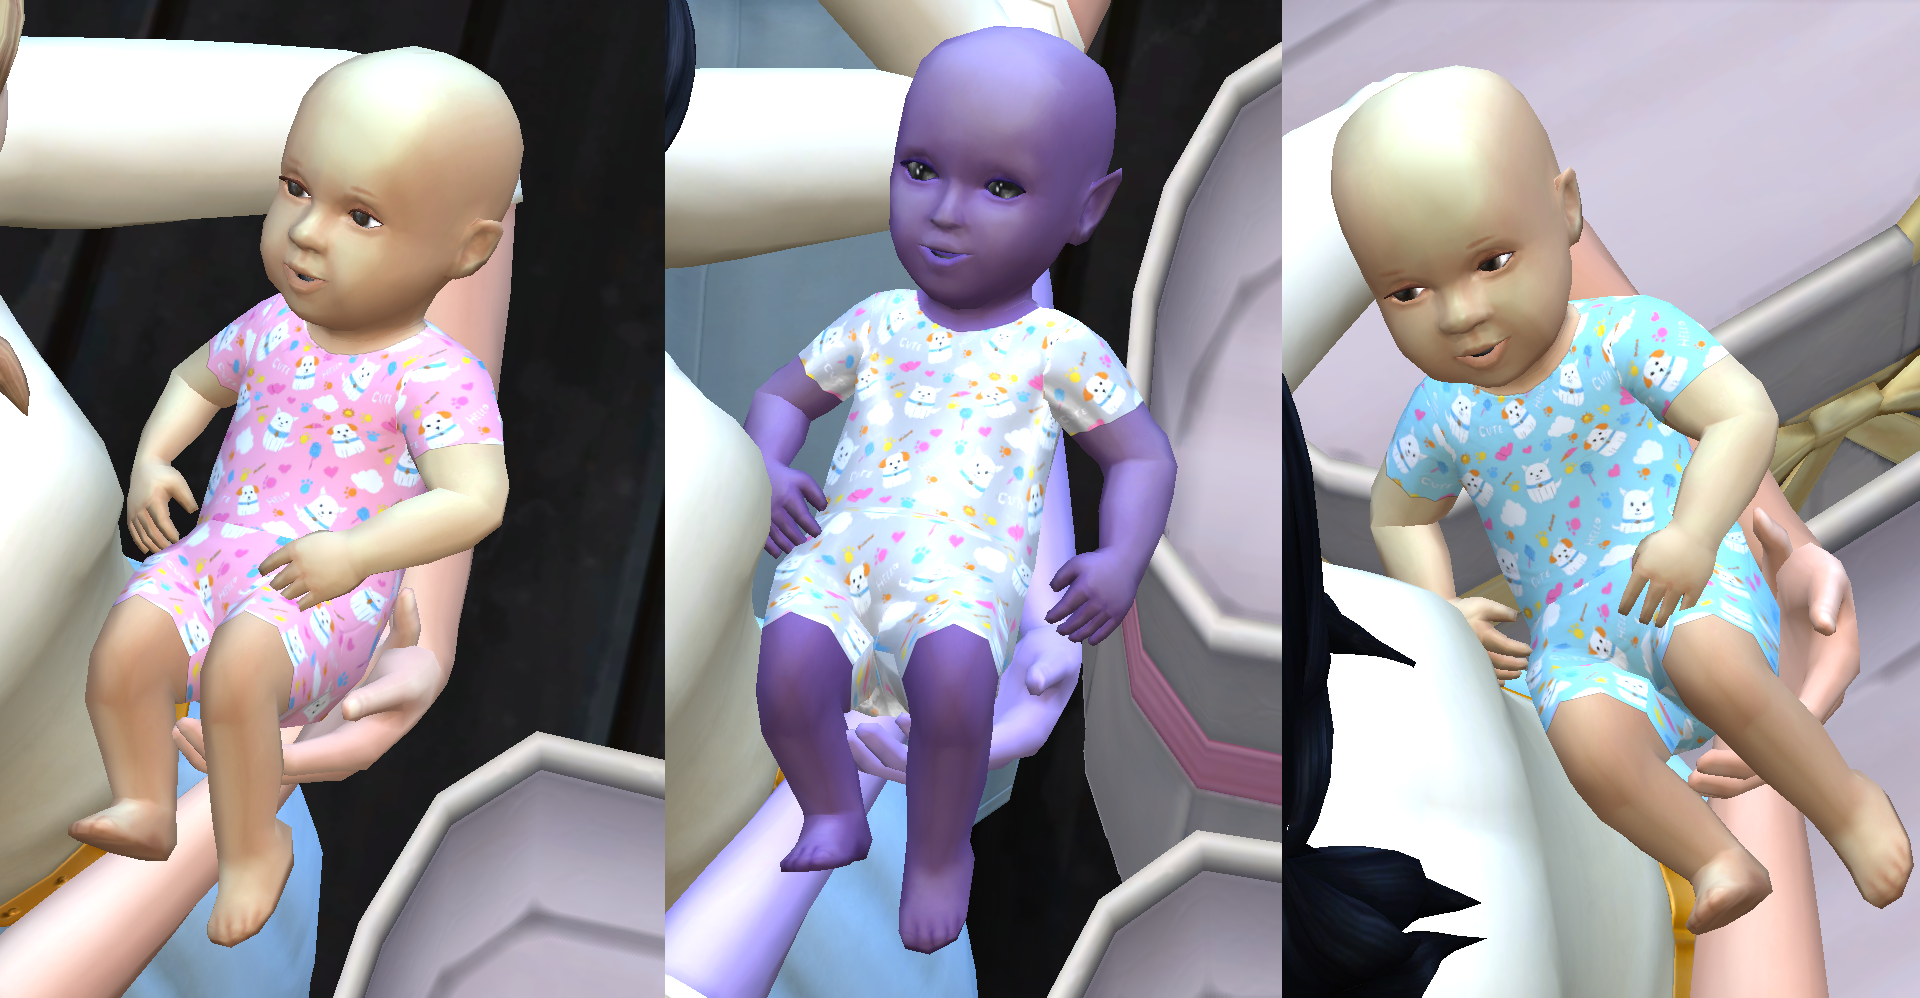 Doggies summer pj's baby outfit - The Sims 4 Mods - CurseForge